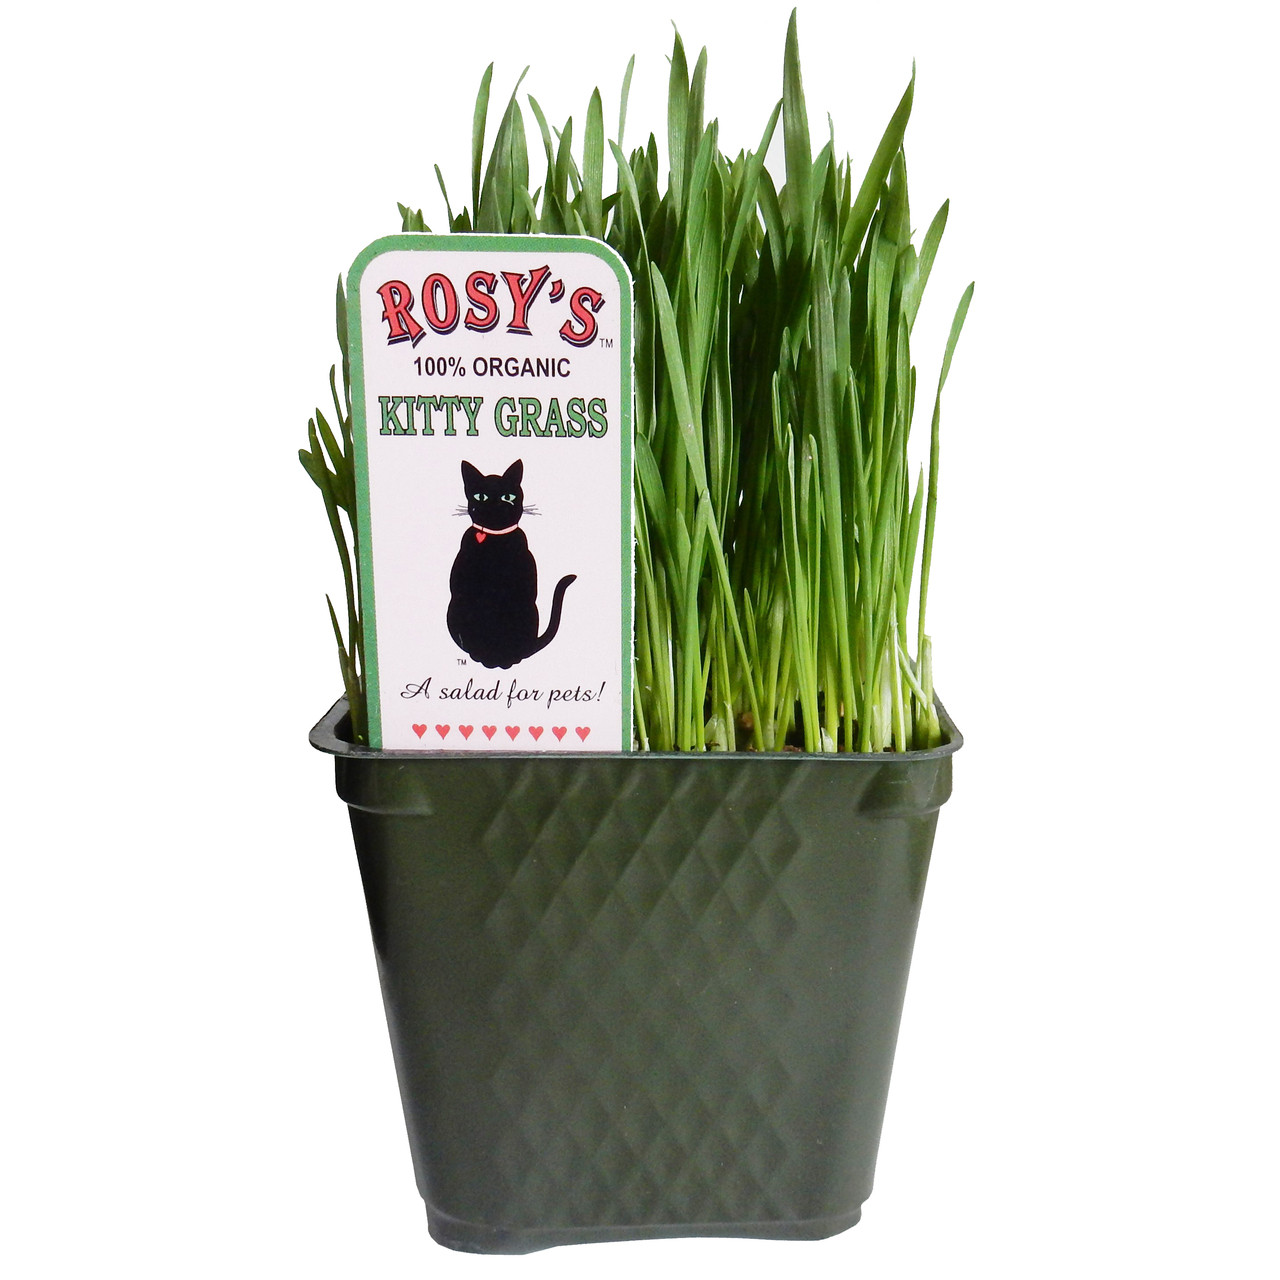 Rosy's 100% Organic Kitty Grass for Pets